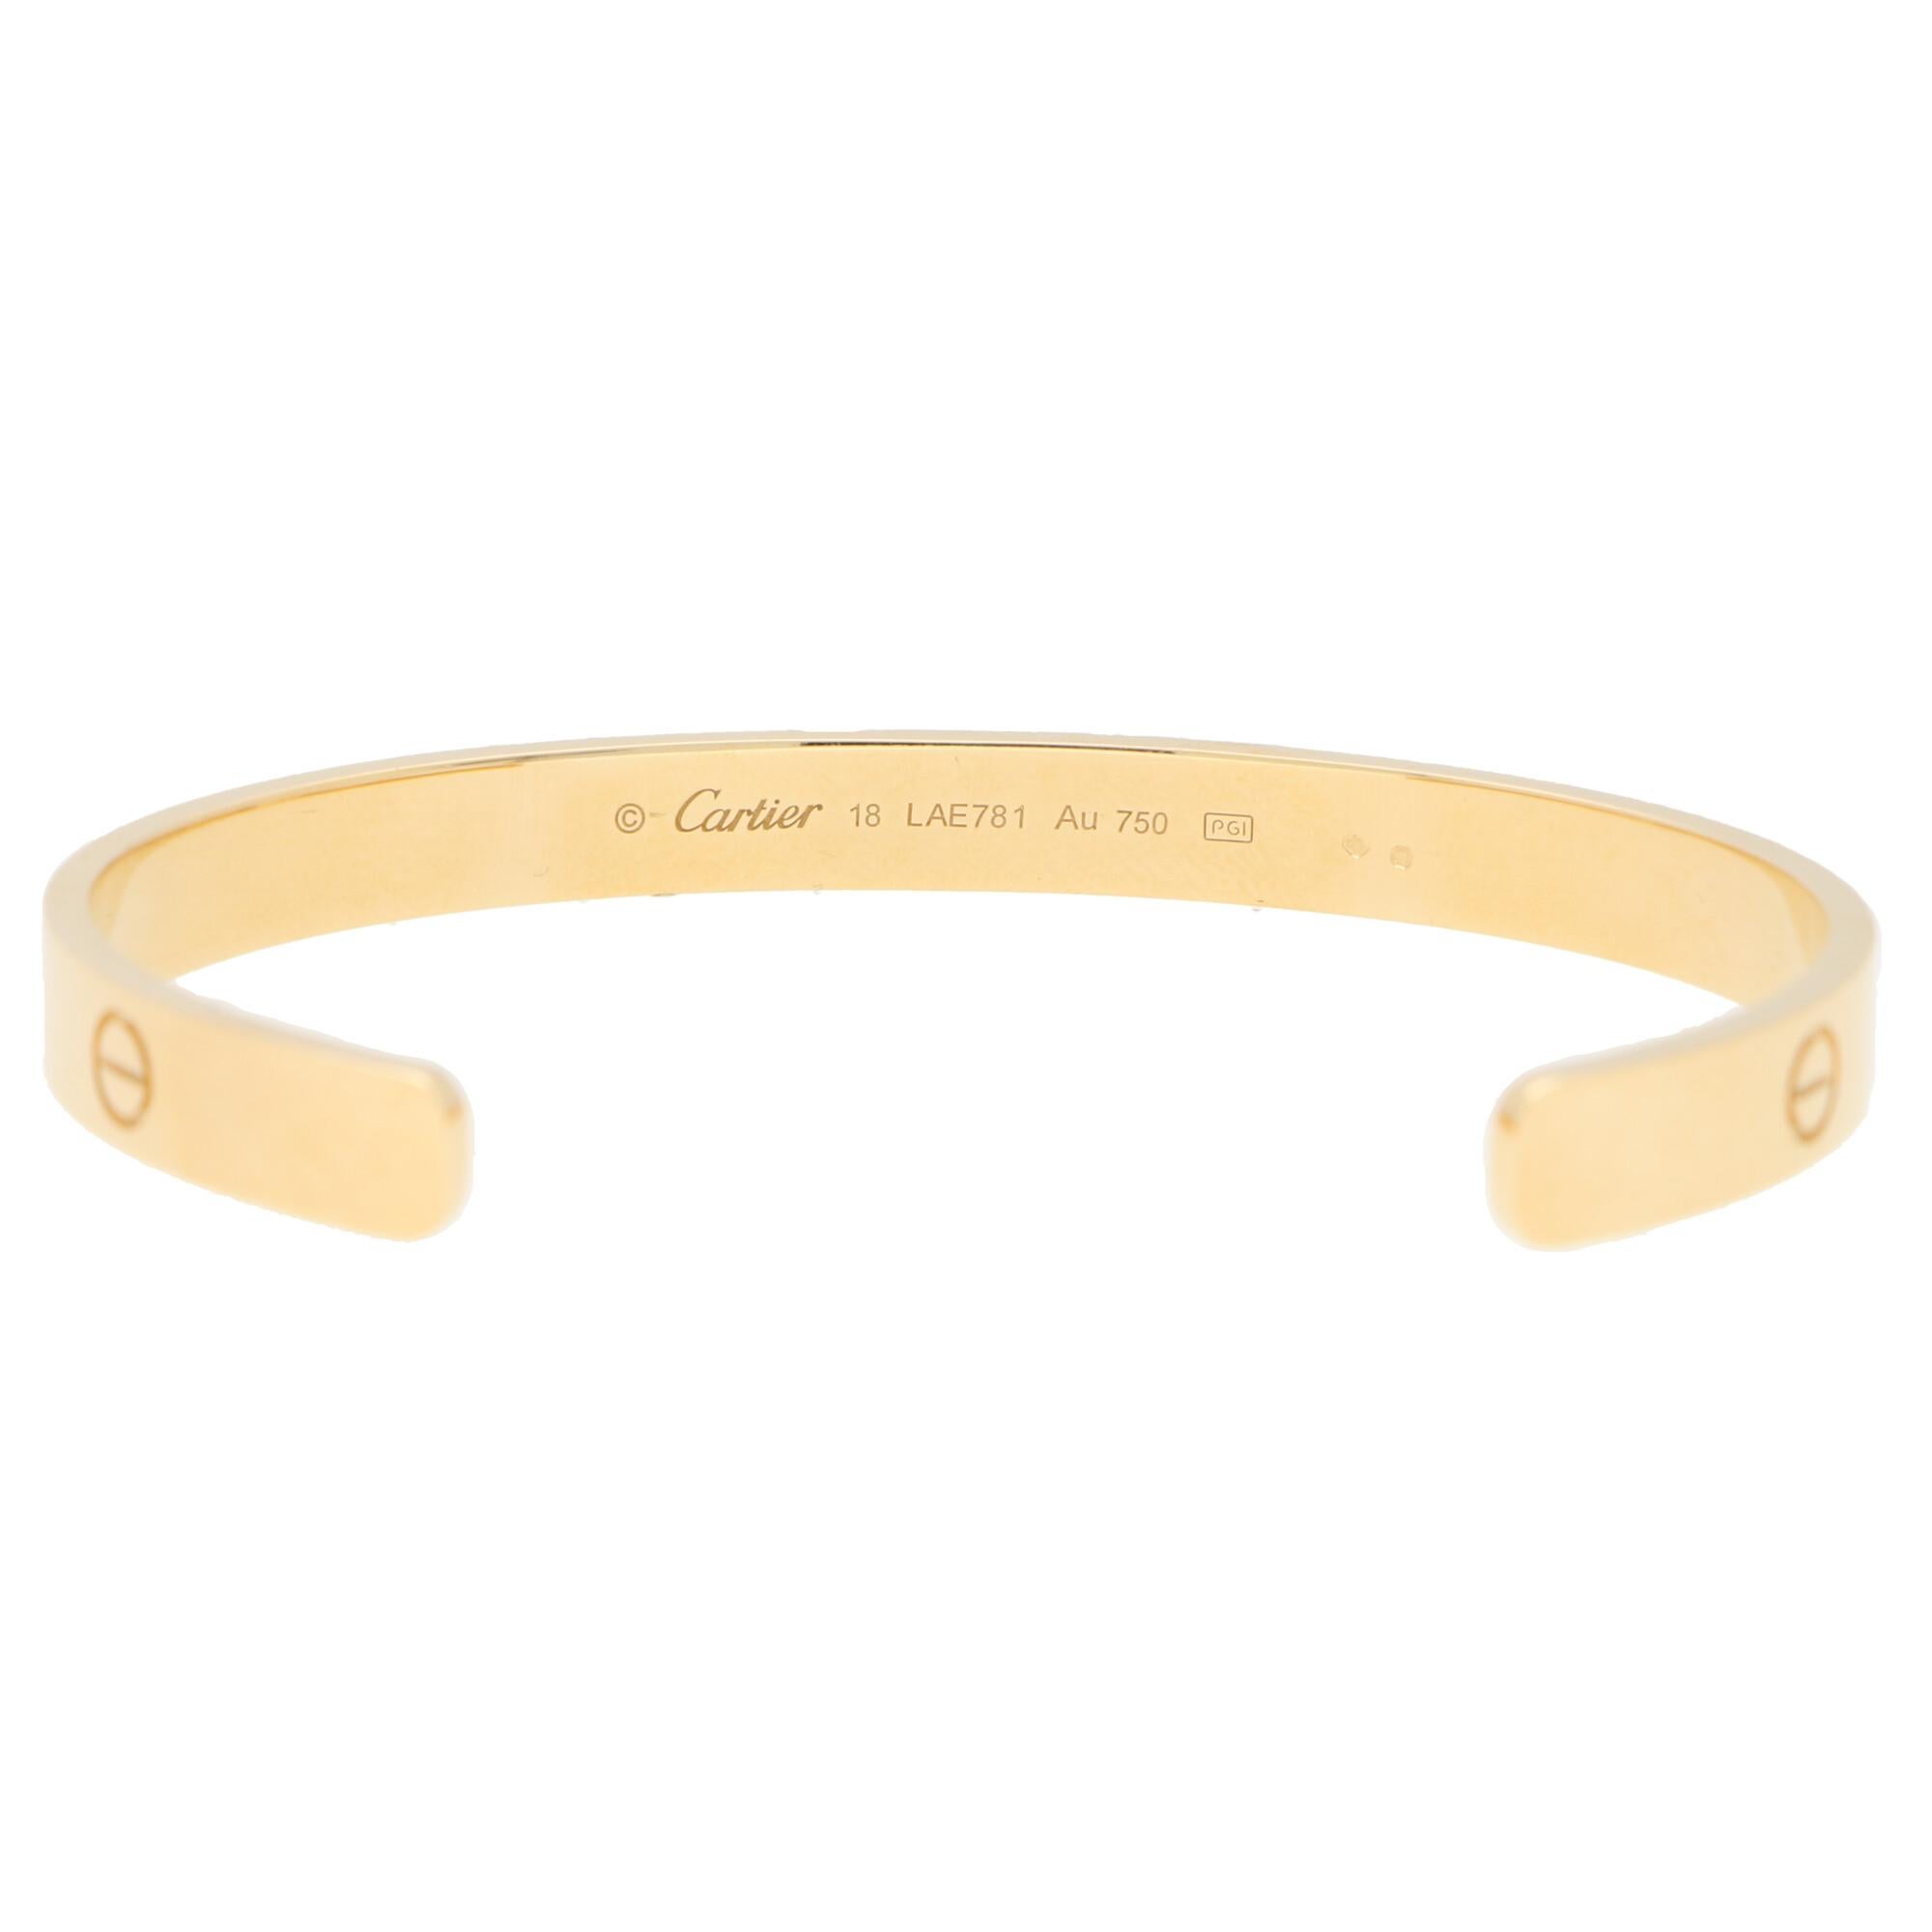 Women's or Men's Vintage Cartier LOVE U Bangle Set in 18k Yellow Gold, with Box and Certificate